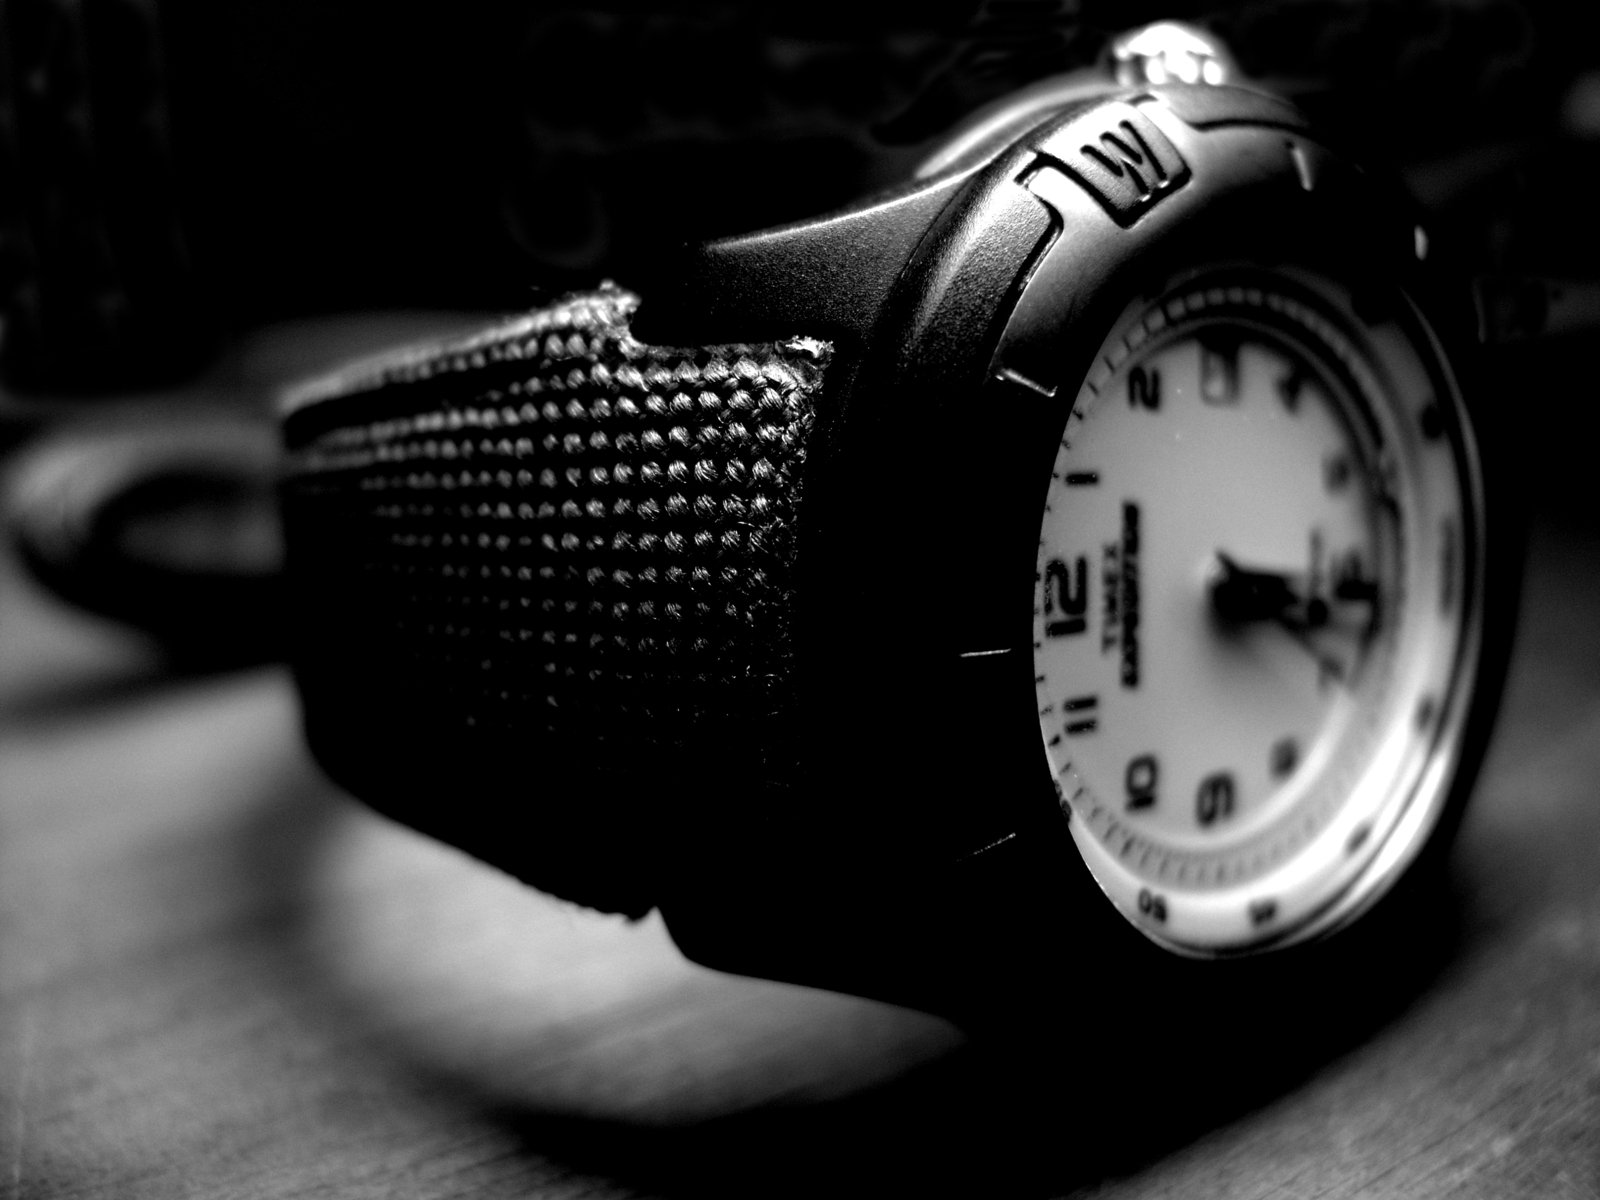 a watch on the table sits in black and white